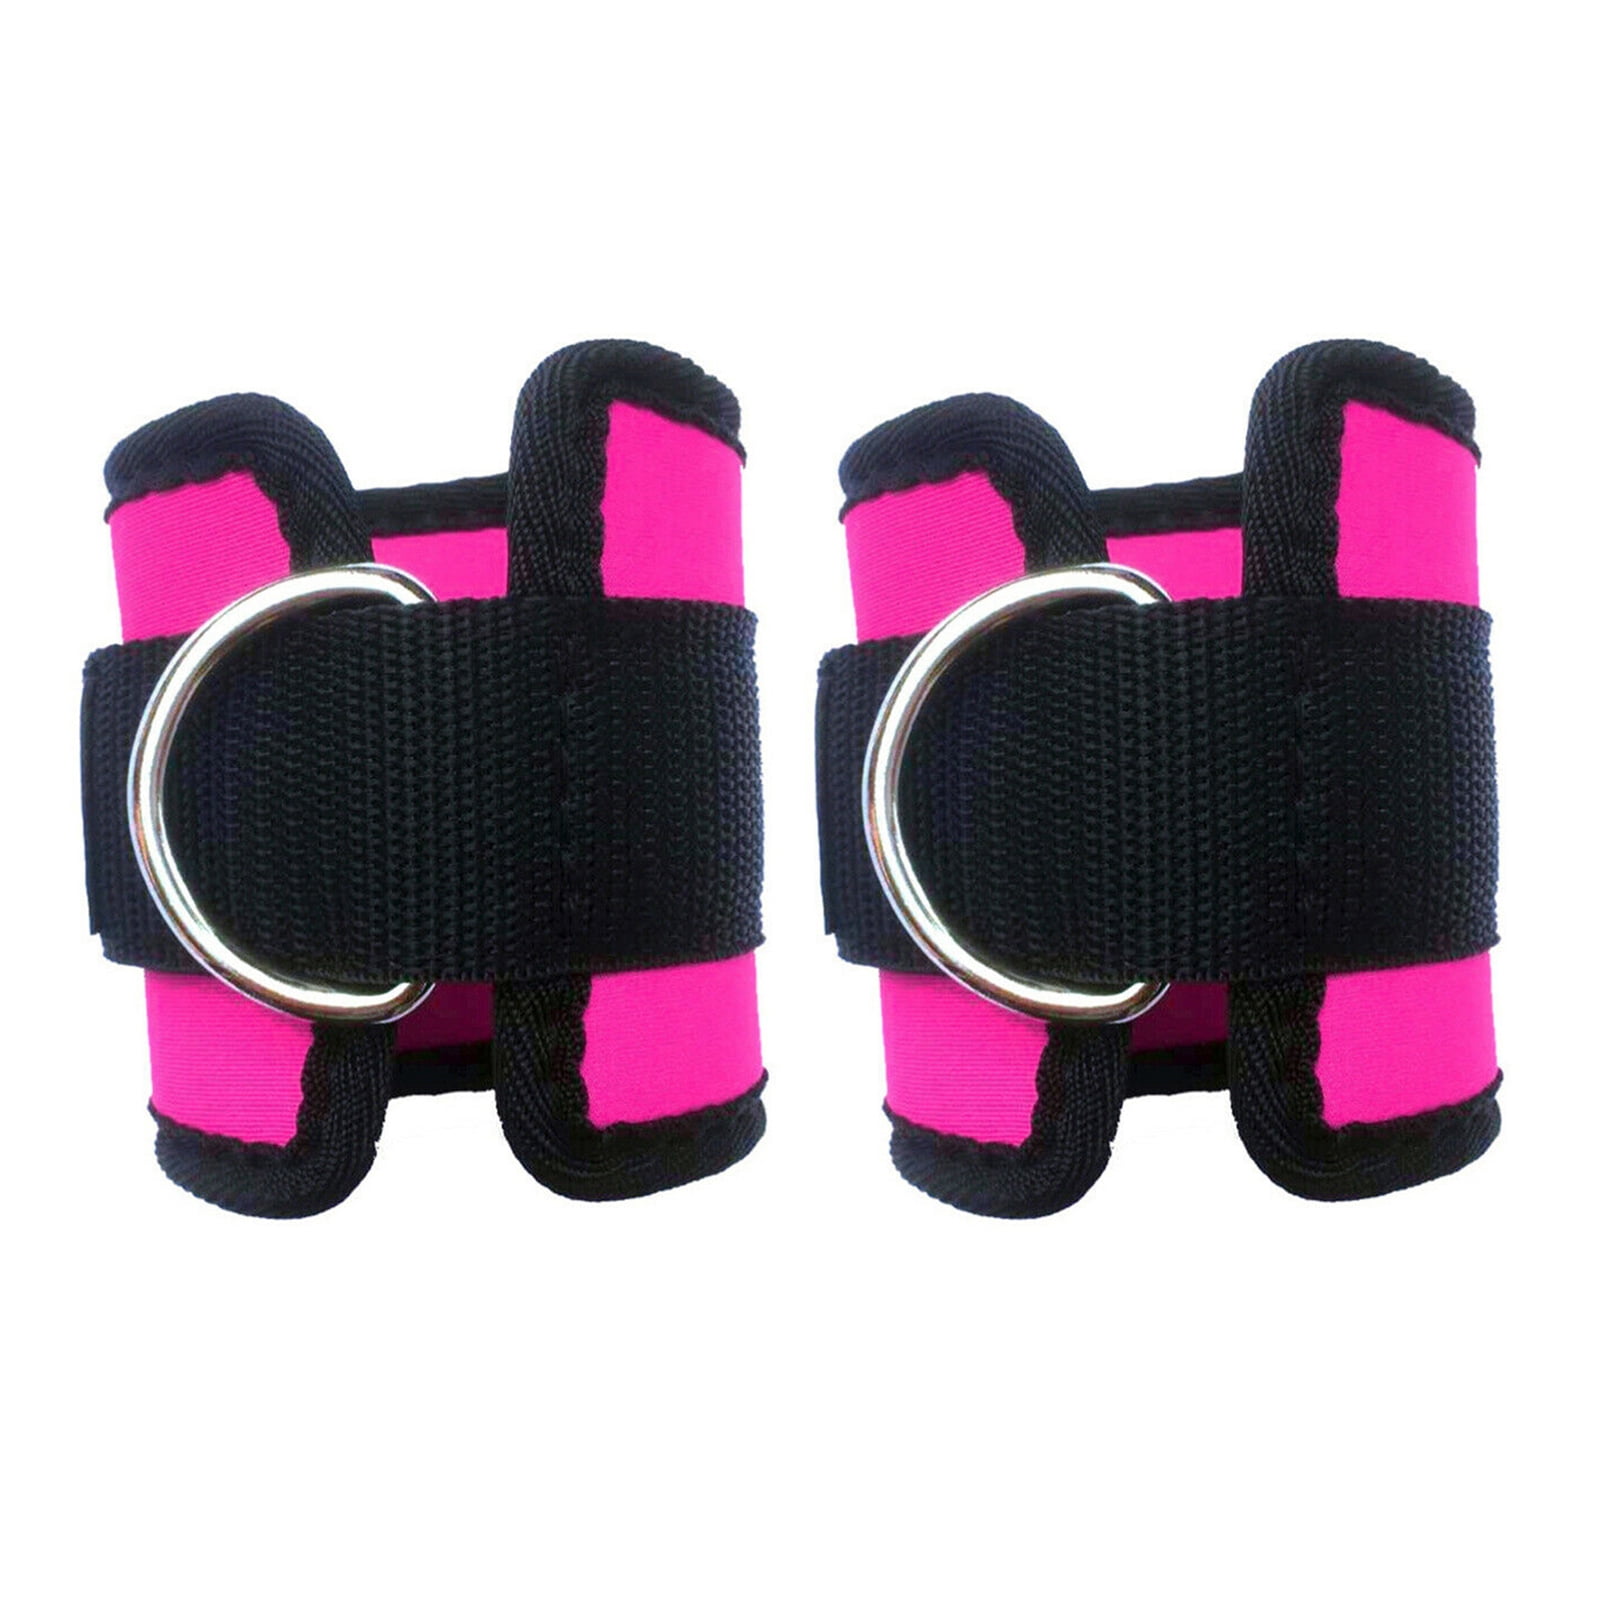 2PCS  Ankle Weights  StrapAdjustable Wrist  Running Fitness Strength Black USA 